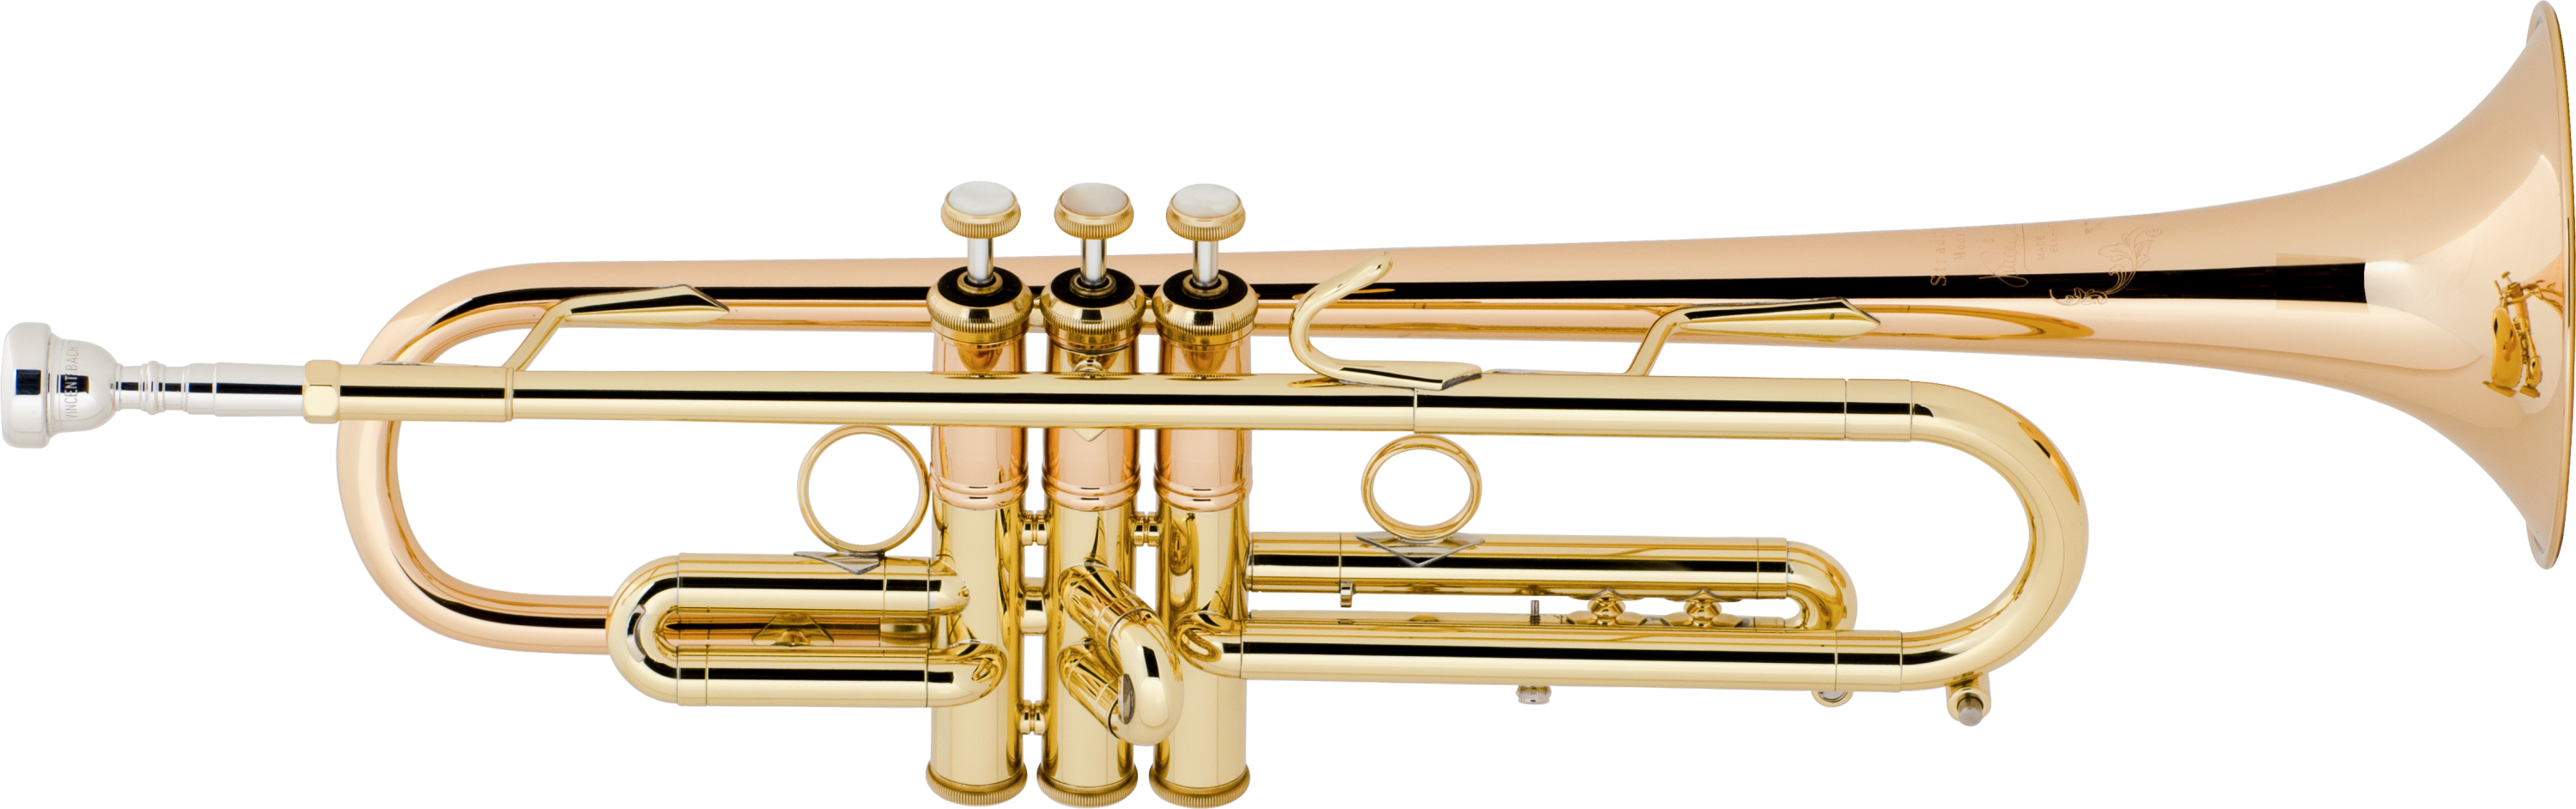 Bach LT190 Stradivarius Commercial Bb Trumpet - #1 Bell - Clear Lacquer